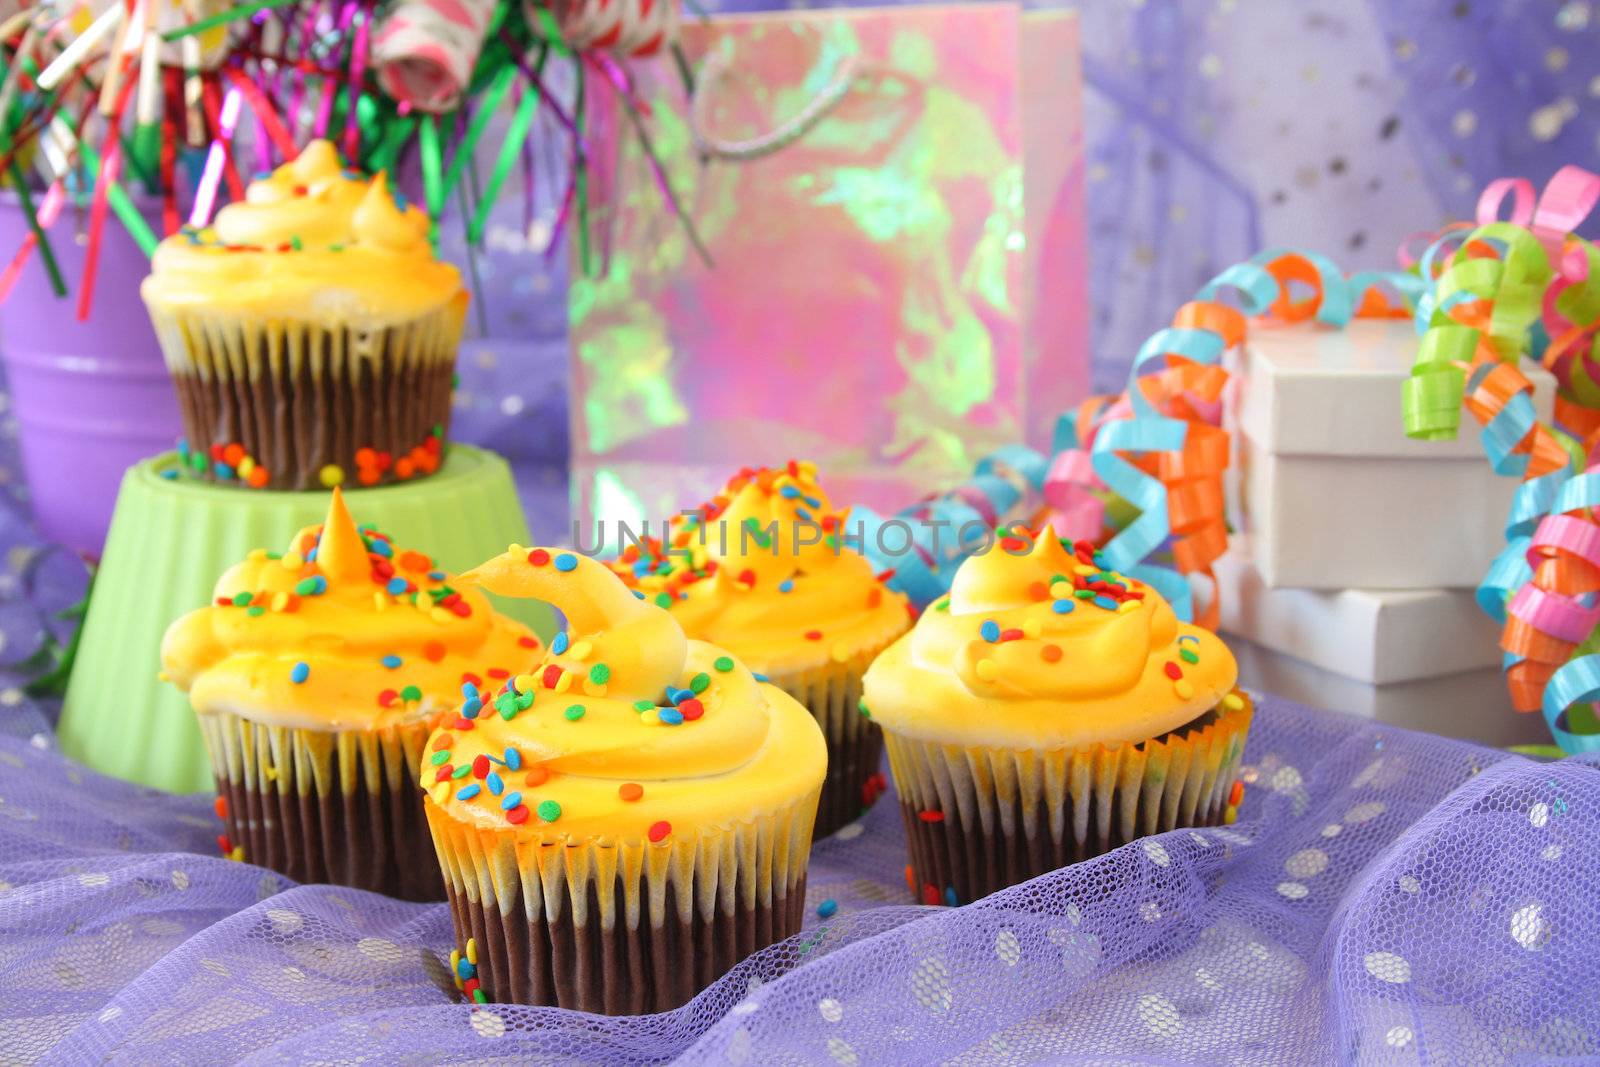 Party Cupcakes by thephotoguy